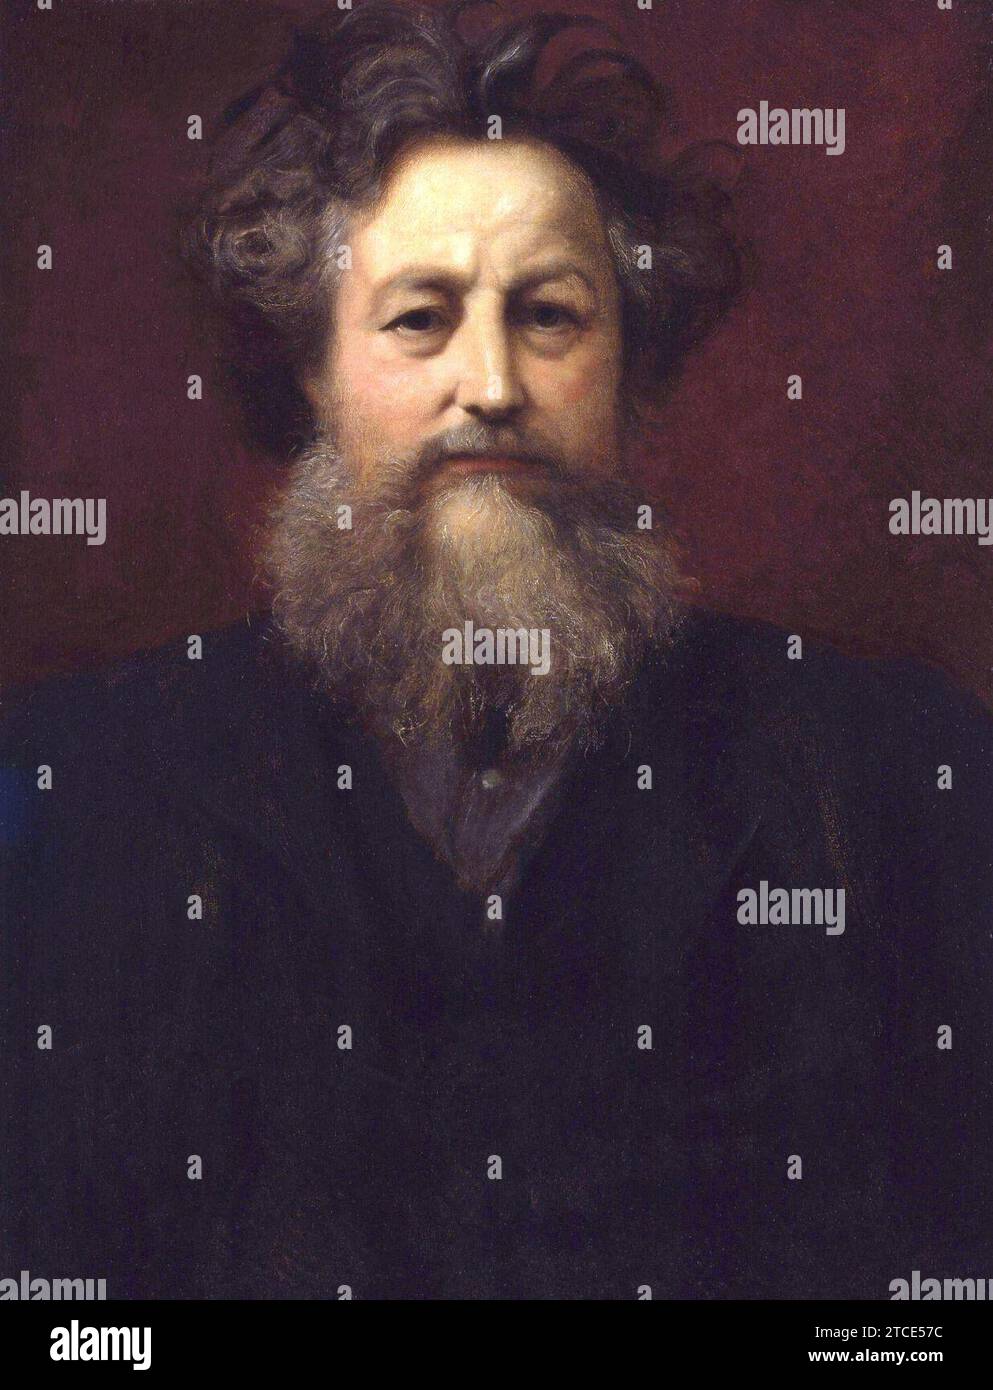 William Morris by Sir William Blake Richmond retouched. Stock Photo